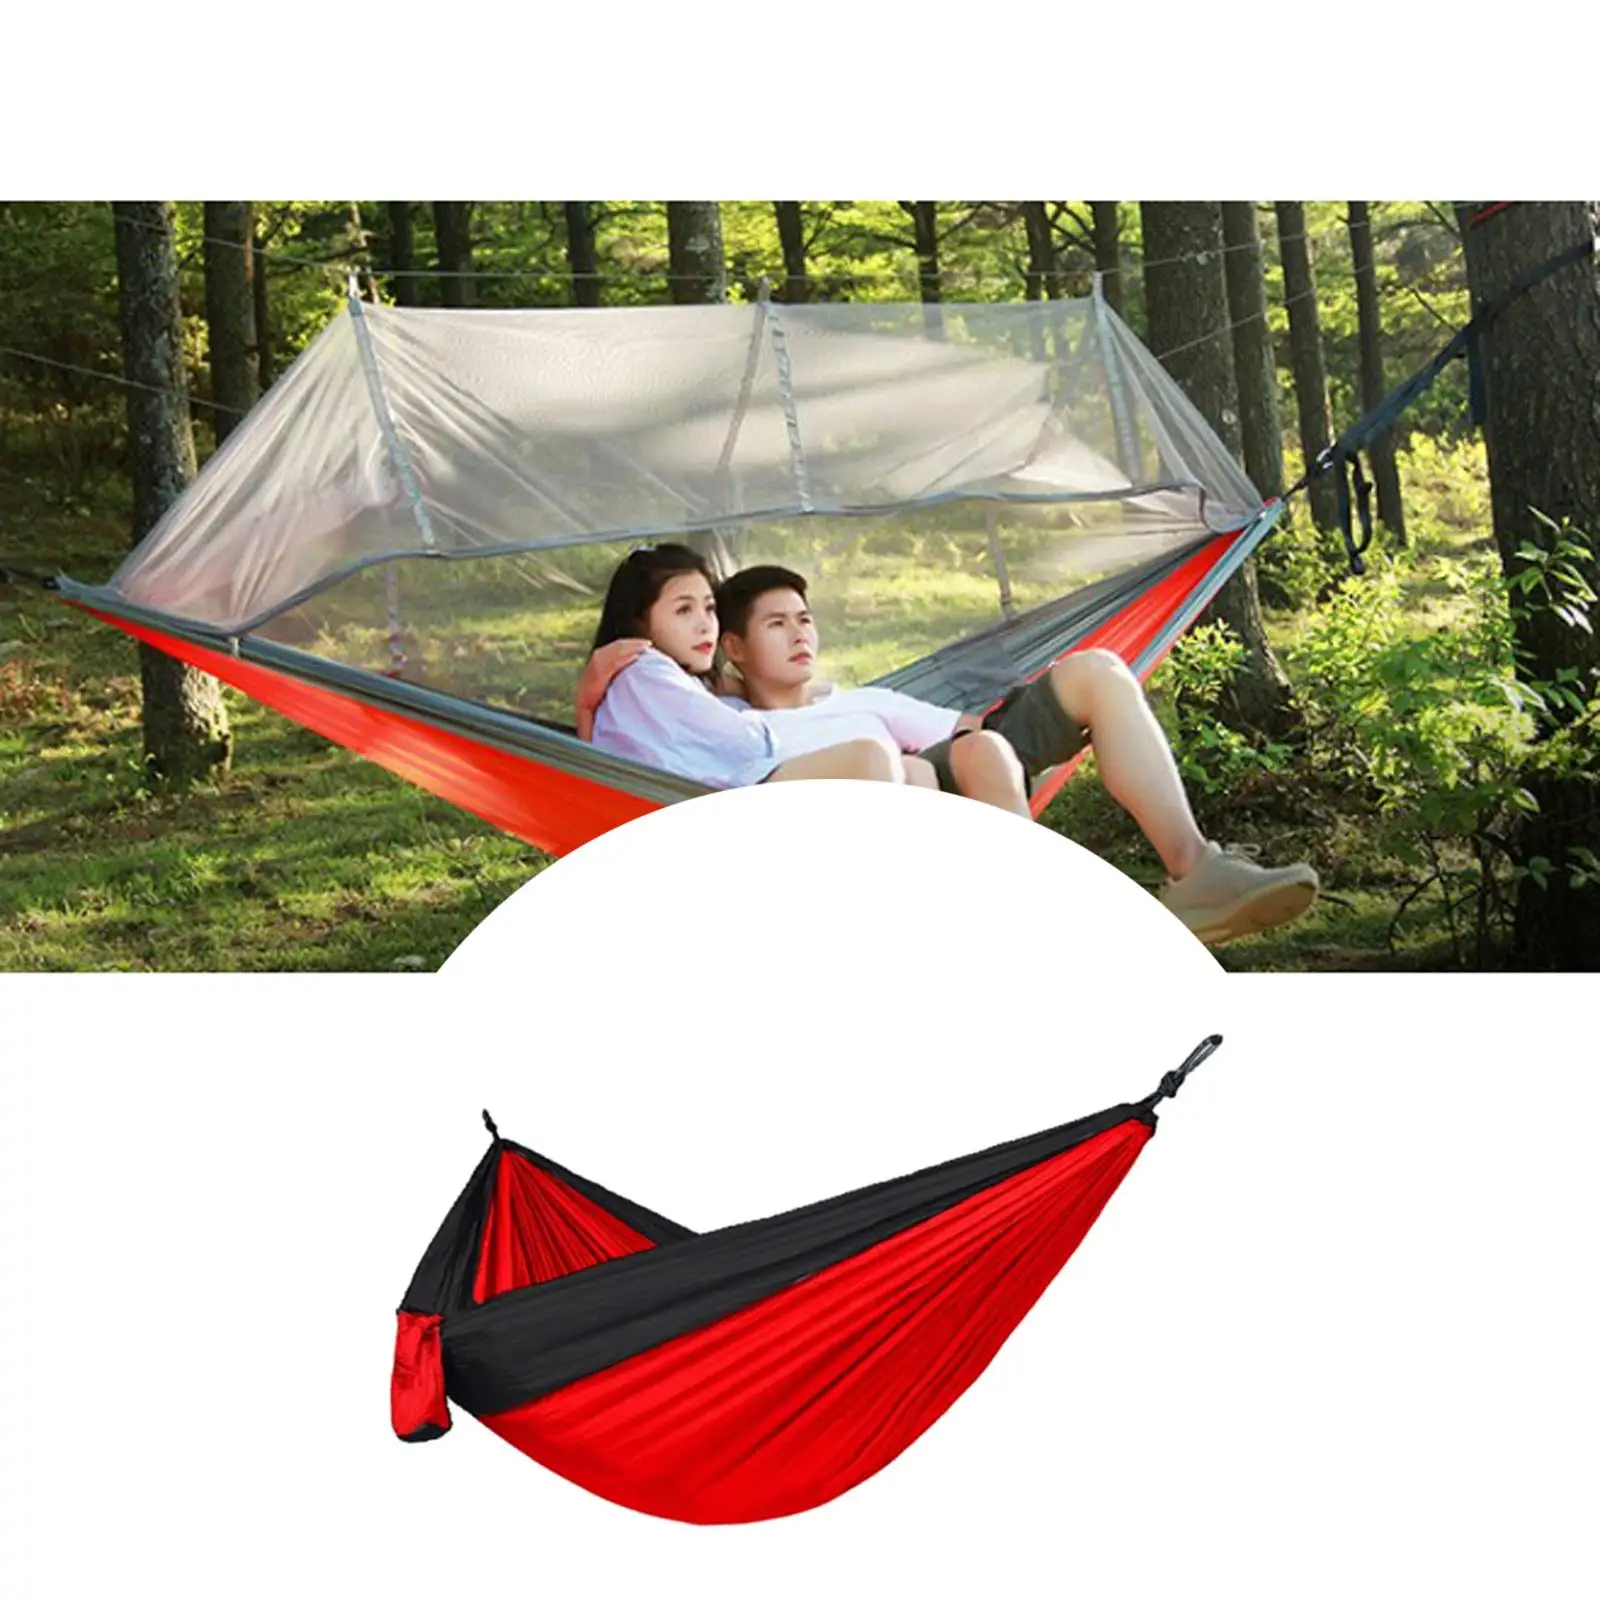 Travel Camping Hammock   Fabric Double Swing Bed for Outdoor